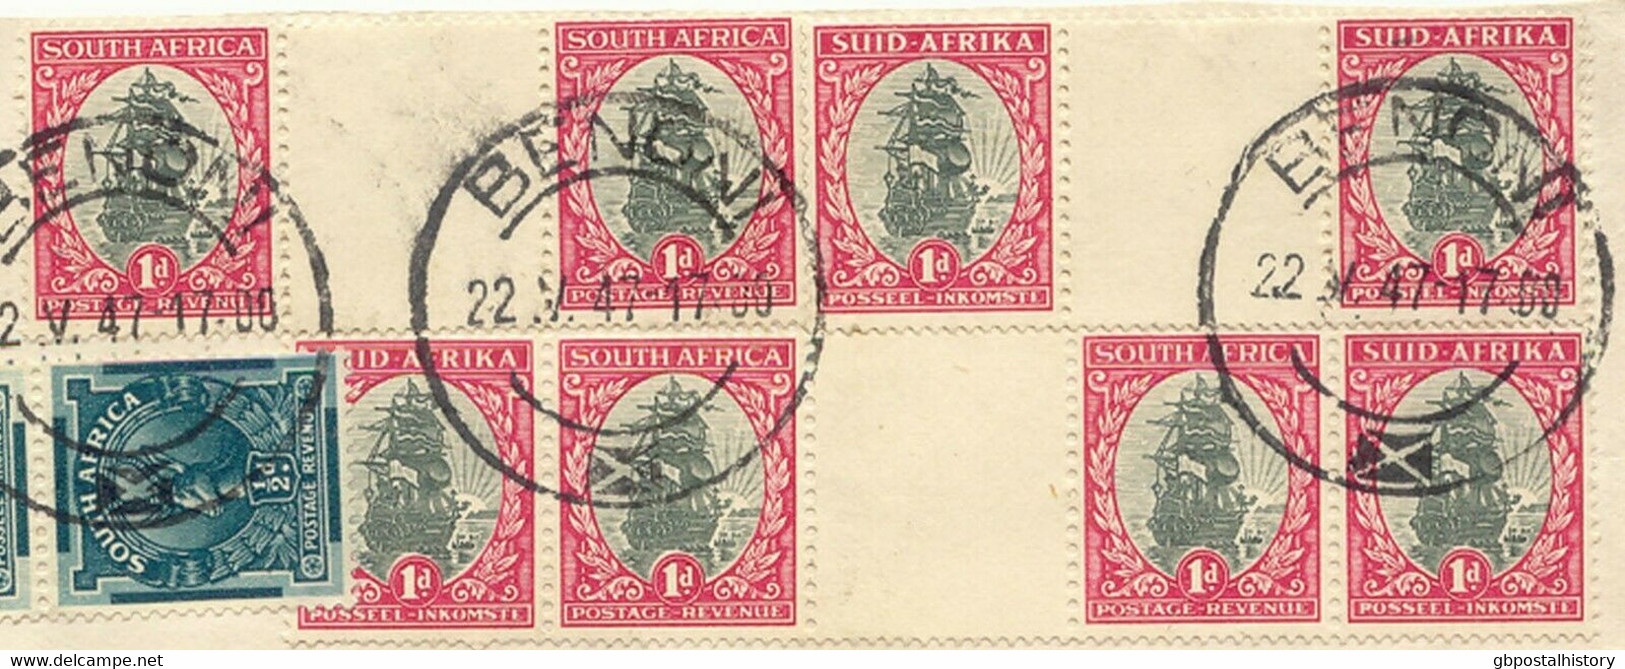 SOUTH AFRICA 1947 VF Early After War AIRMAIL Cover From BENONI THREE GUTTERPAIRS - Luftpost